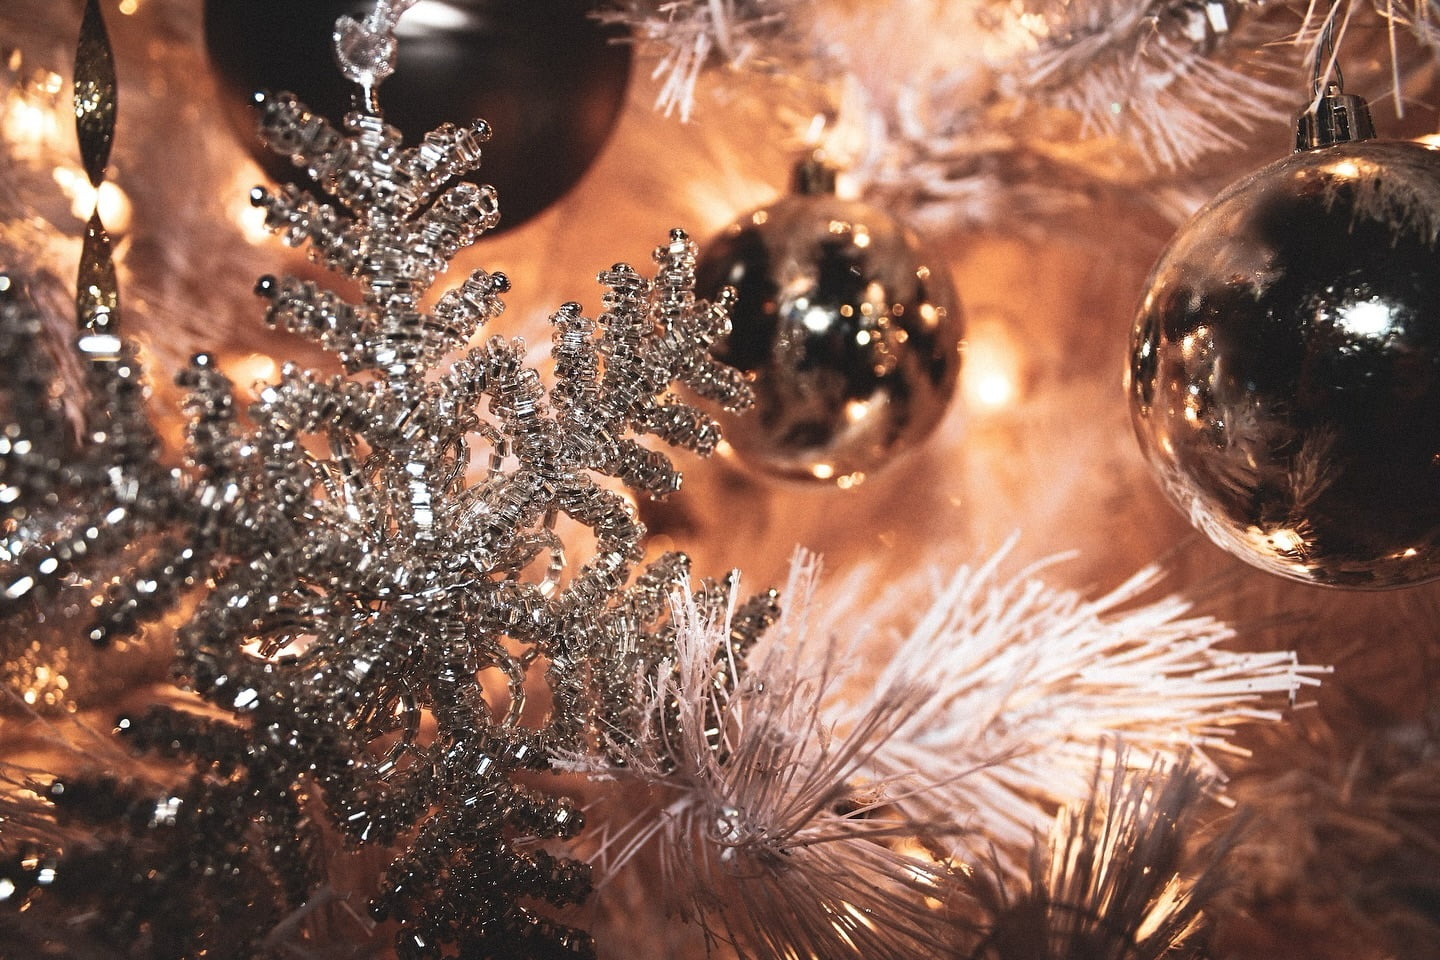 We at The Peninsula would like to extend our warmest wishes for a Merry Christmas and Happy New Year